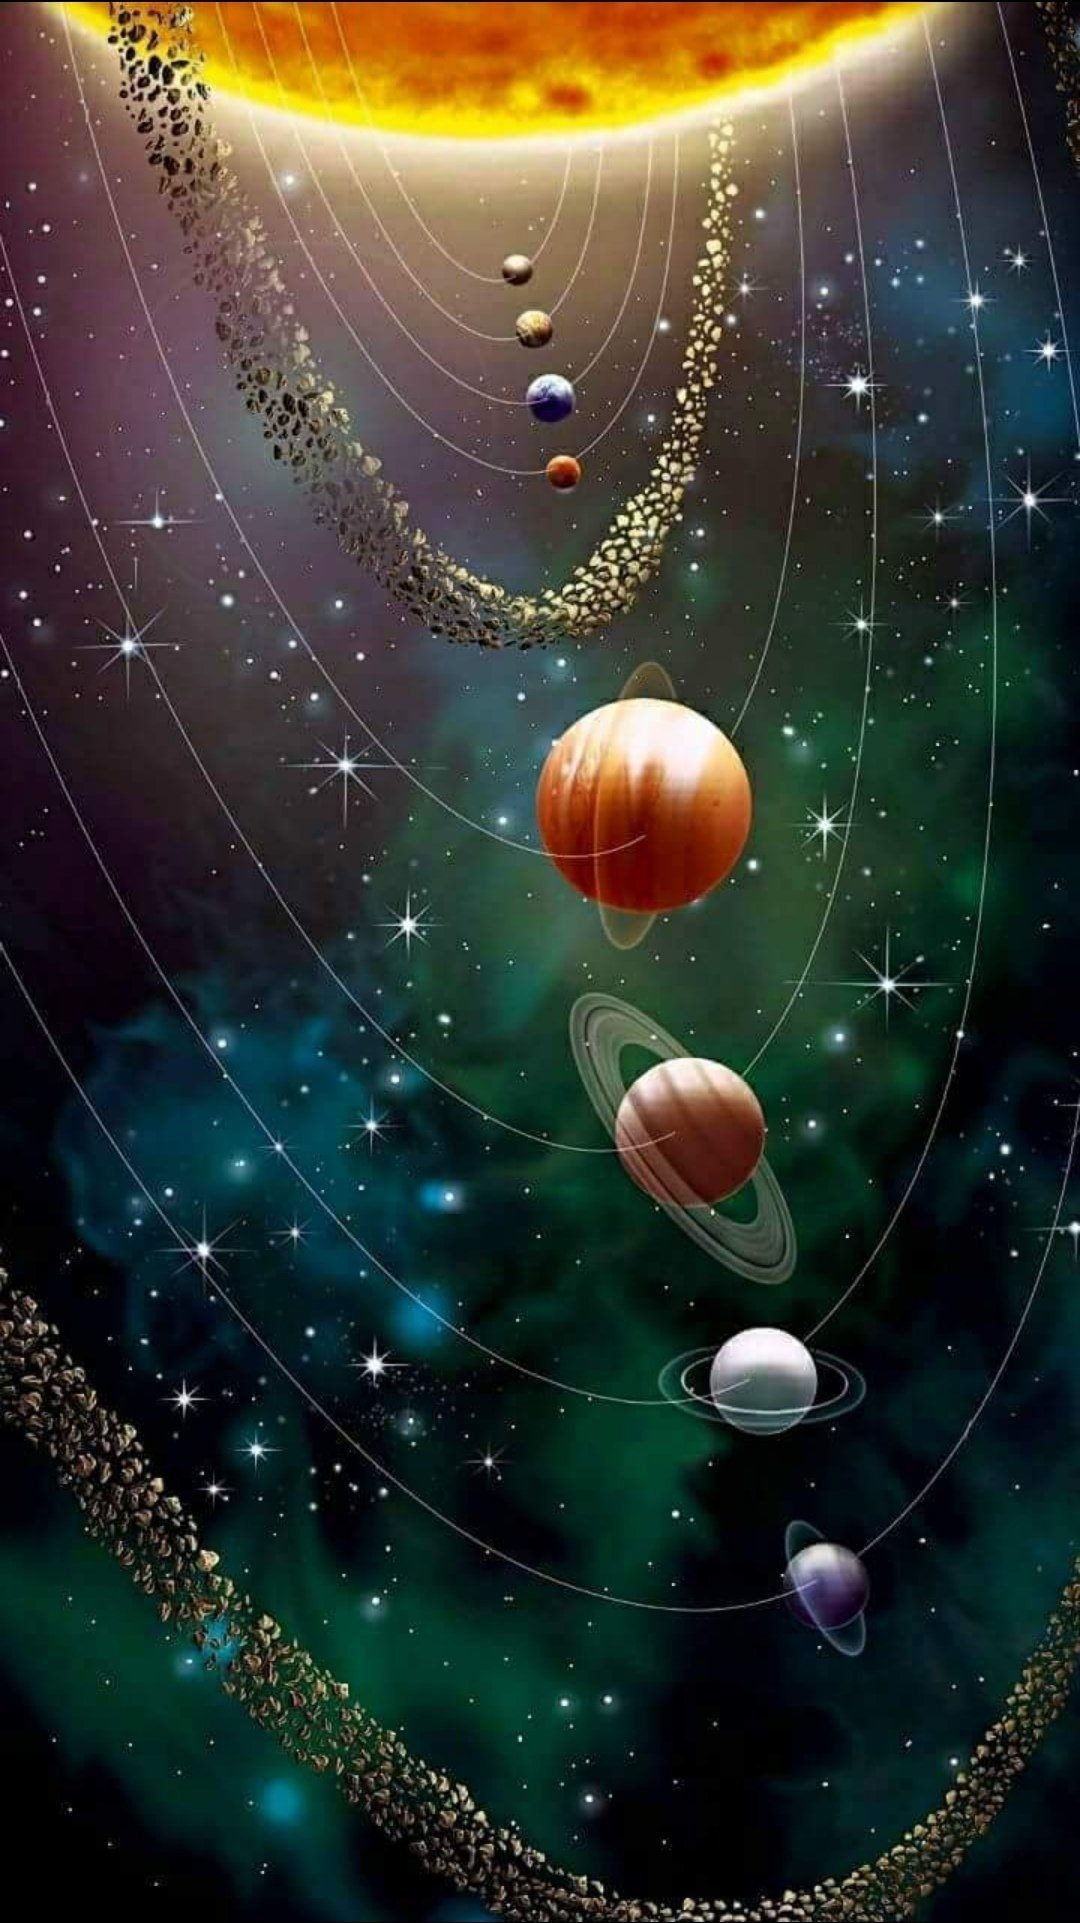 1080x1923 Physics & Astronomy Zone on Twitter: "Beautiful picture… "